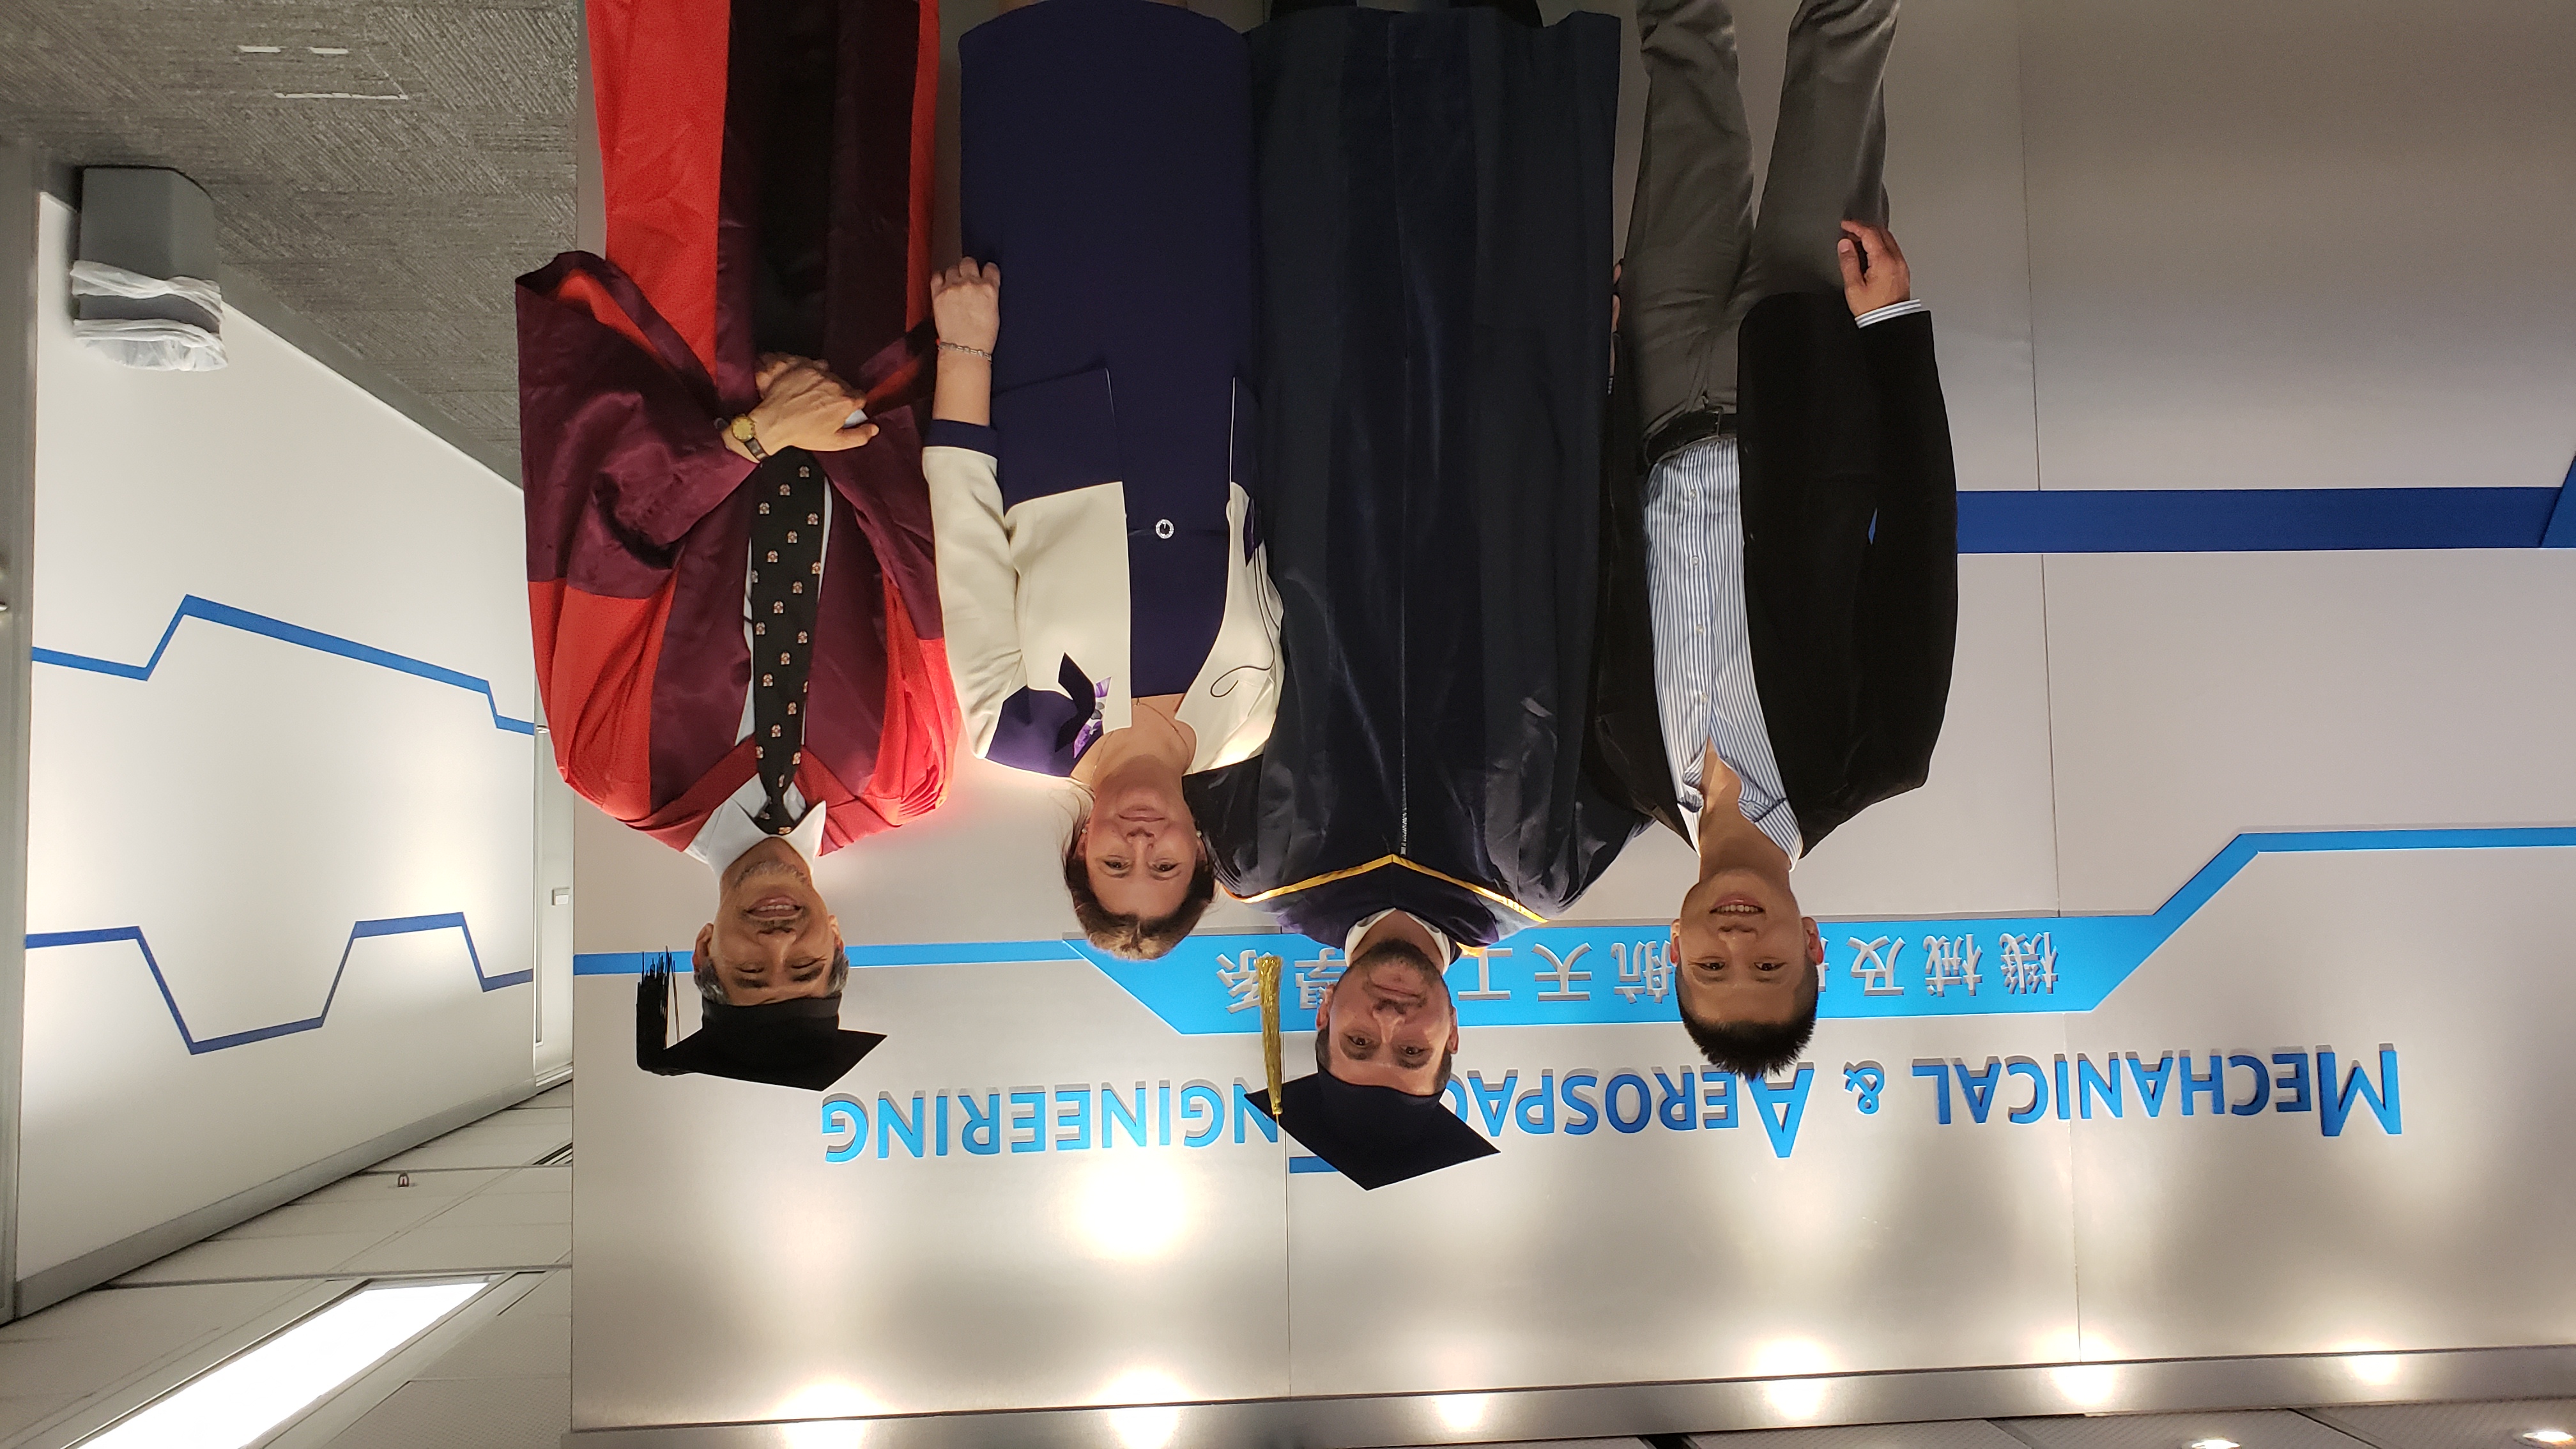 Alex (second from left) thanks with his mother (second from right) for her support to pursue his dream, and his PhD project supervisors Prof. Mathew YUEN (far right) and Prof. Robin MA (far left) for their academic guidance